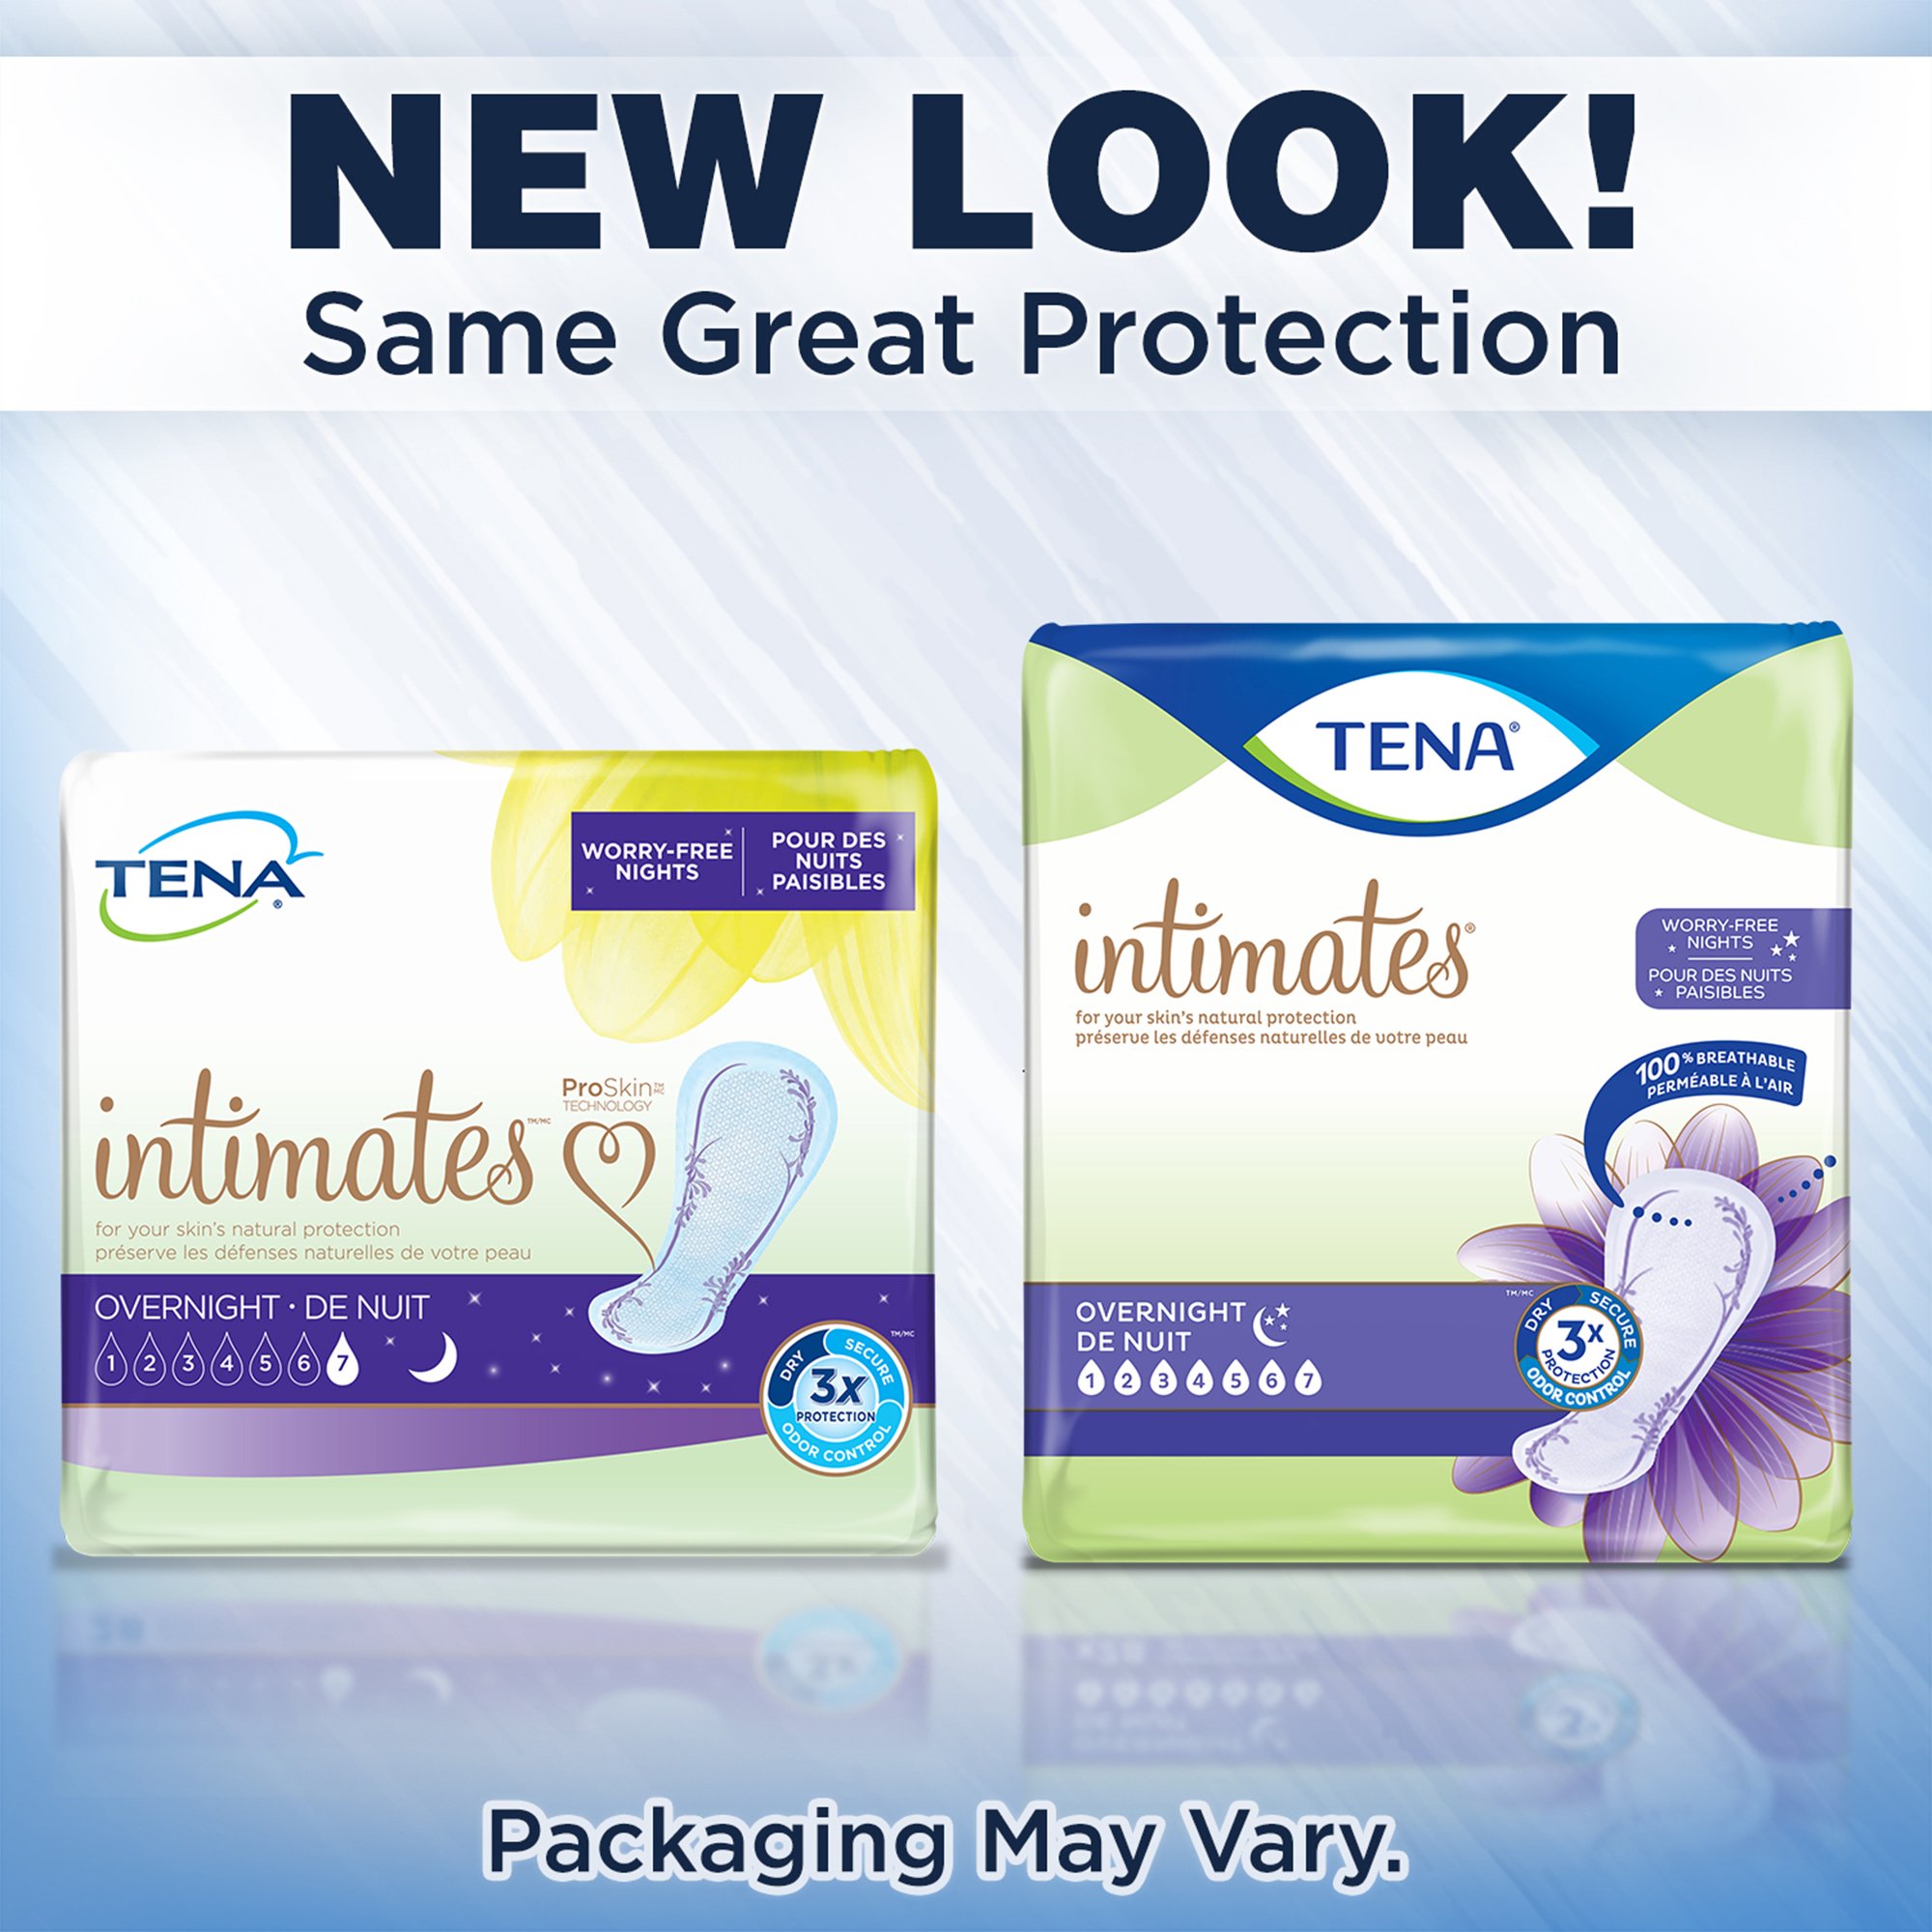 TENA Intimates Pads for Women - disposable bladder leak protection